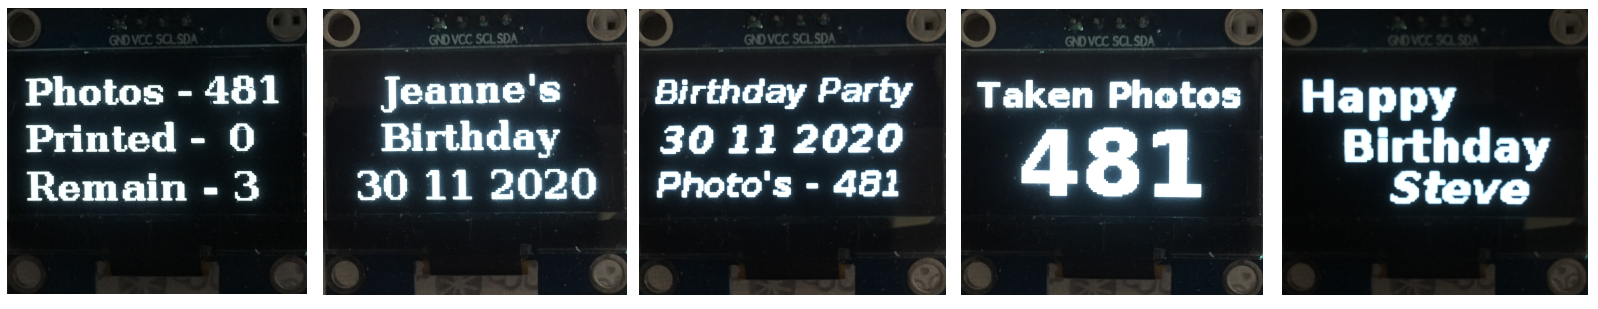 OLED display examples